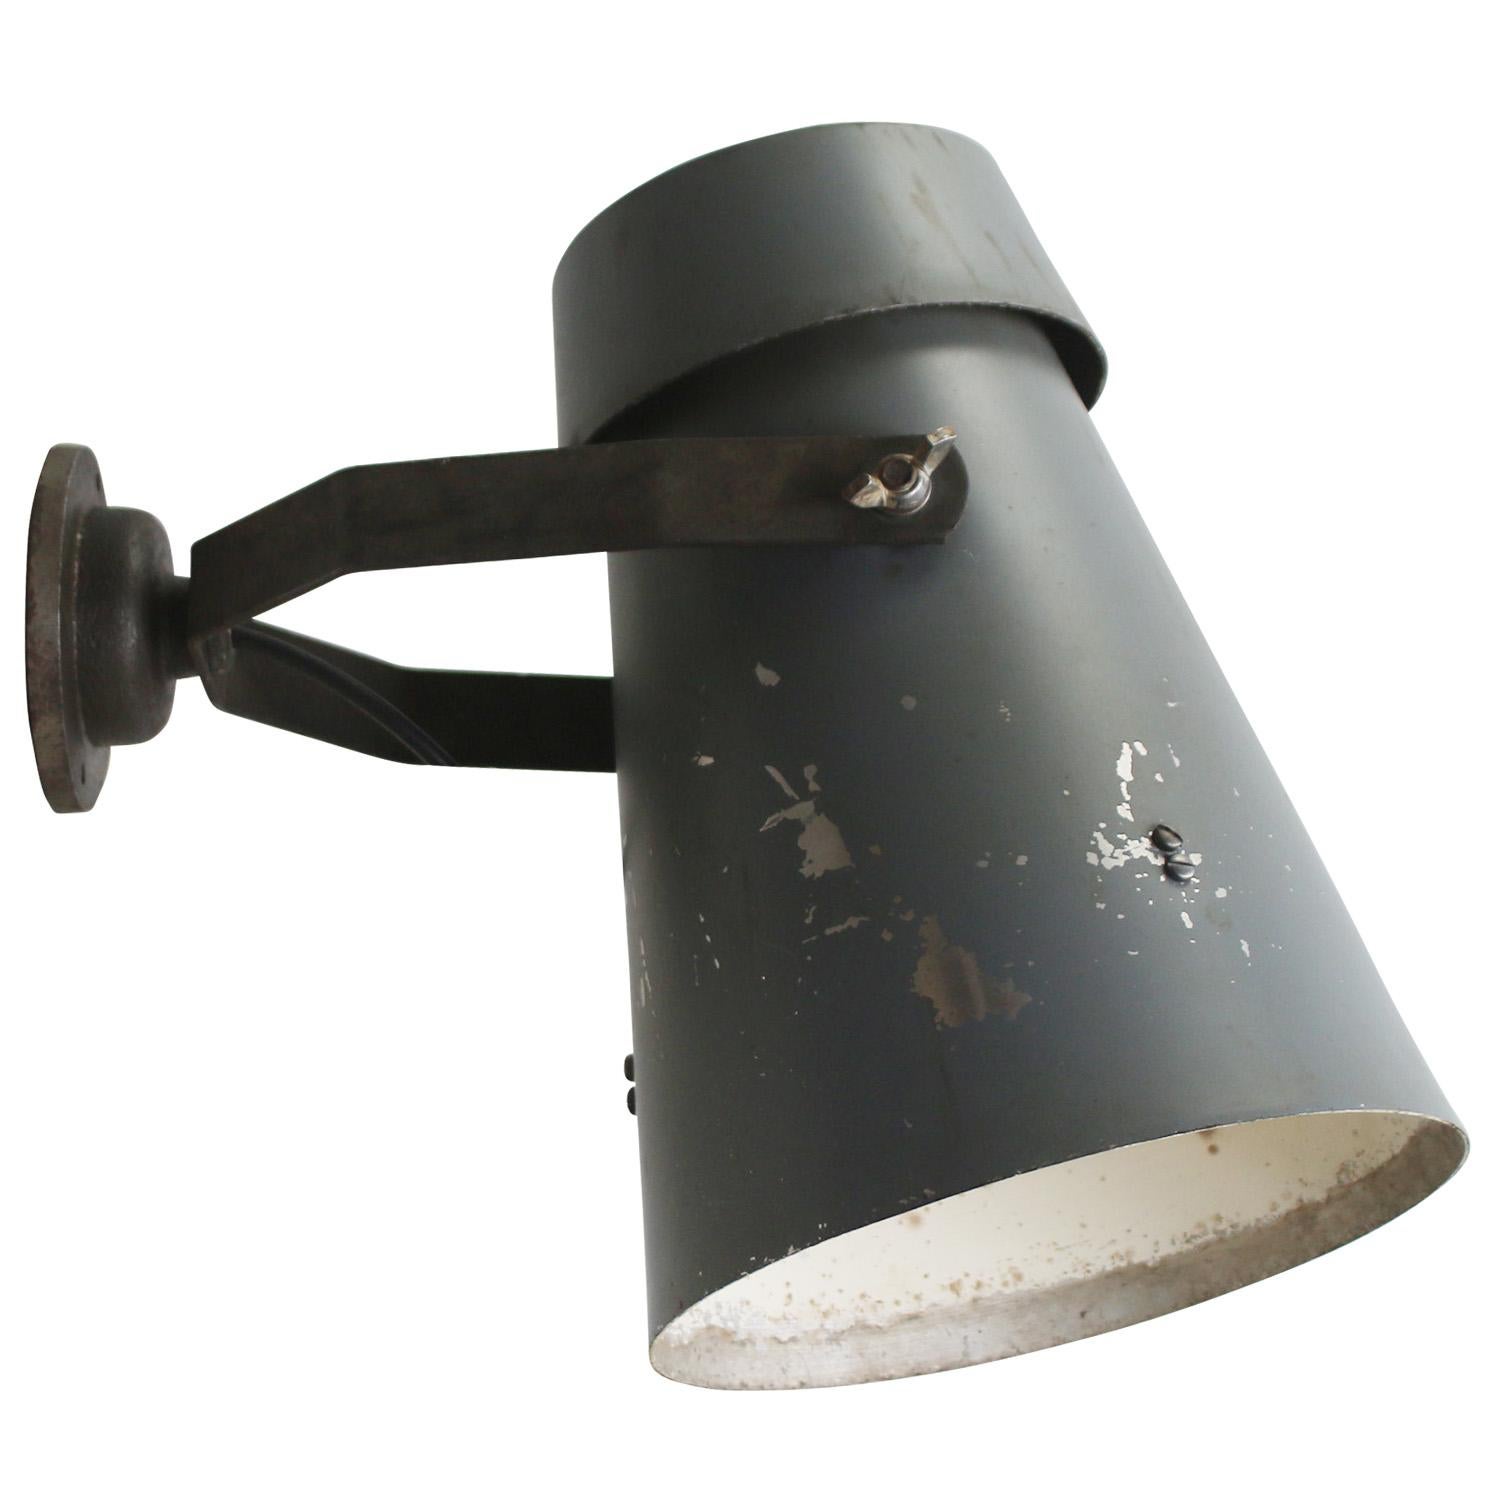 Dutch industrial wall lamp by Philips, Holland
Grey aluminium, white inside
Cast iron arm

Diameter cast iron wall piece: 10.5 cm / 4”,
2 holes to secure

Weight: 2.40 kg / 5.3 lb

Priced per individual item. All lamps have been made suitable by